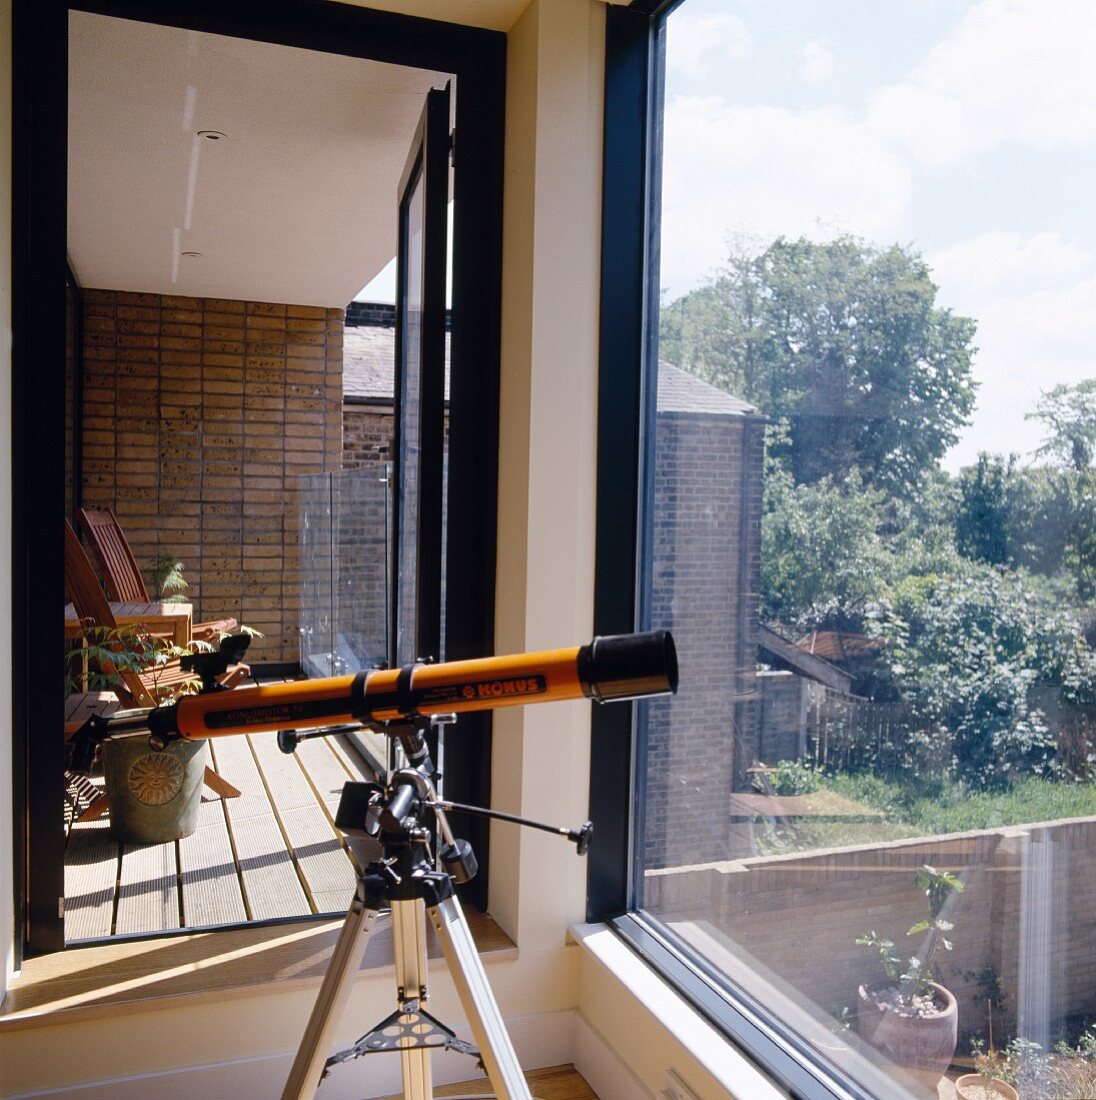 Telescope on a tripod in front of a large bank of windows